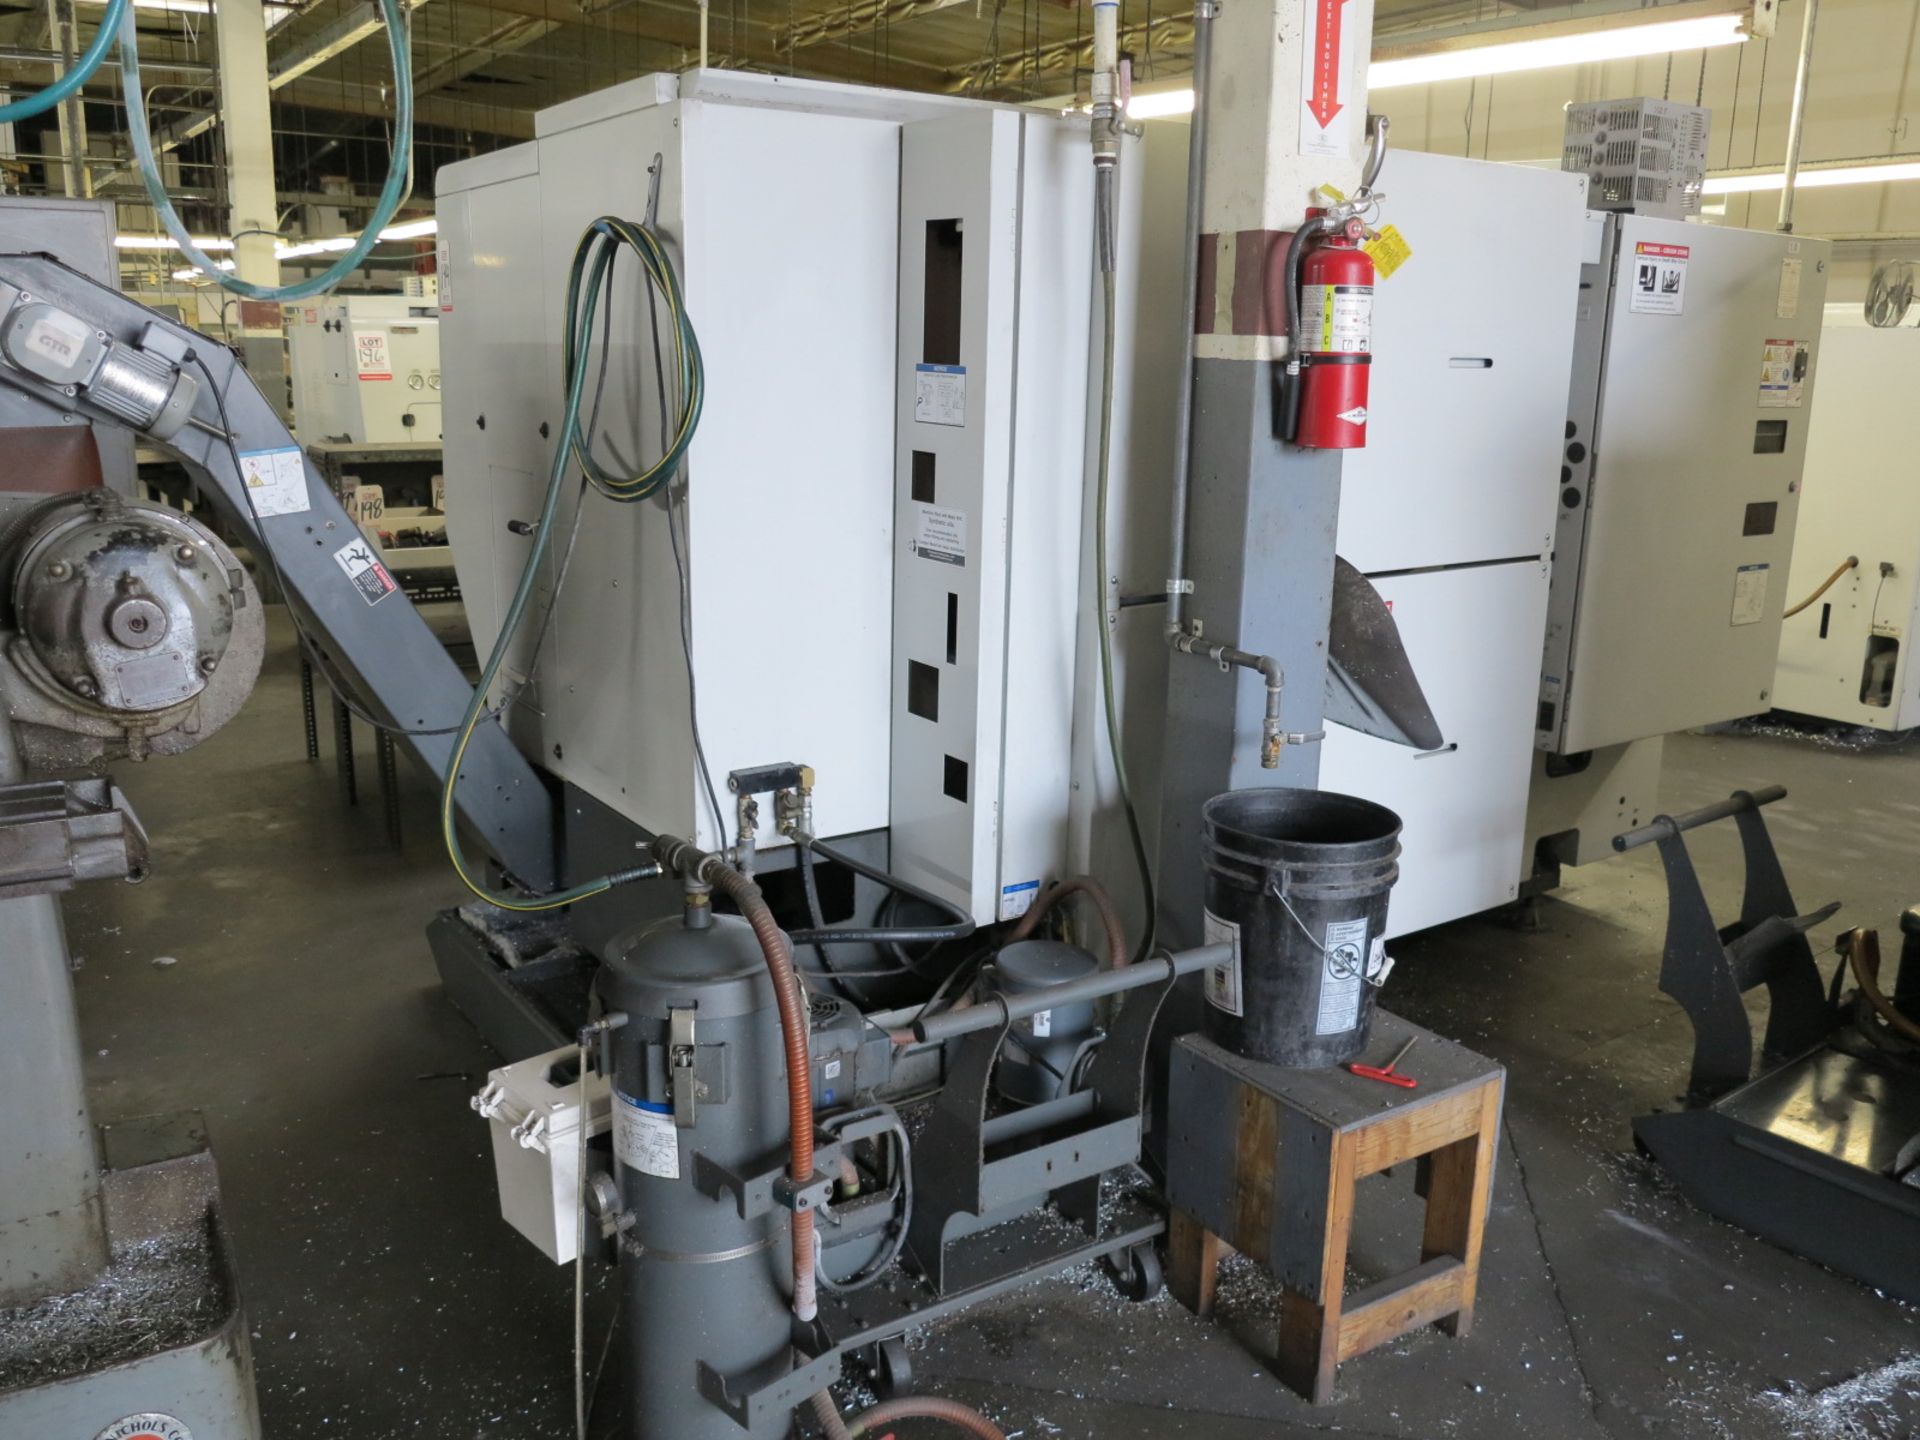 2013 HAAS ST-30Y CNC TURNING CENTER, S/N 3095014, FULL C AXIS, LIVE MILLING/DRILLING, Y AXIS - Image 9 of 14